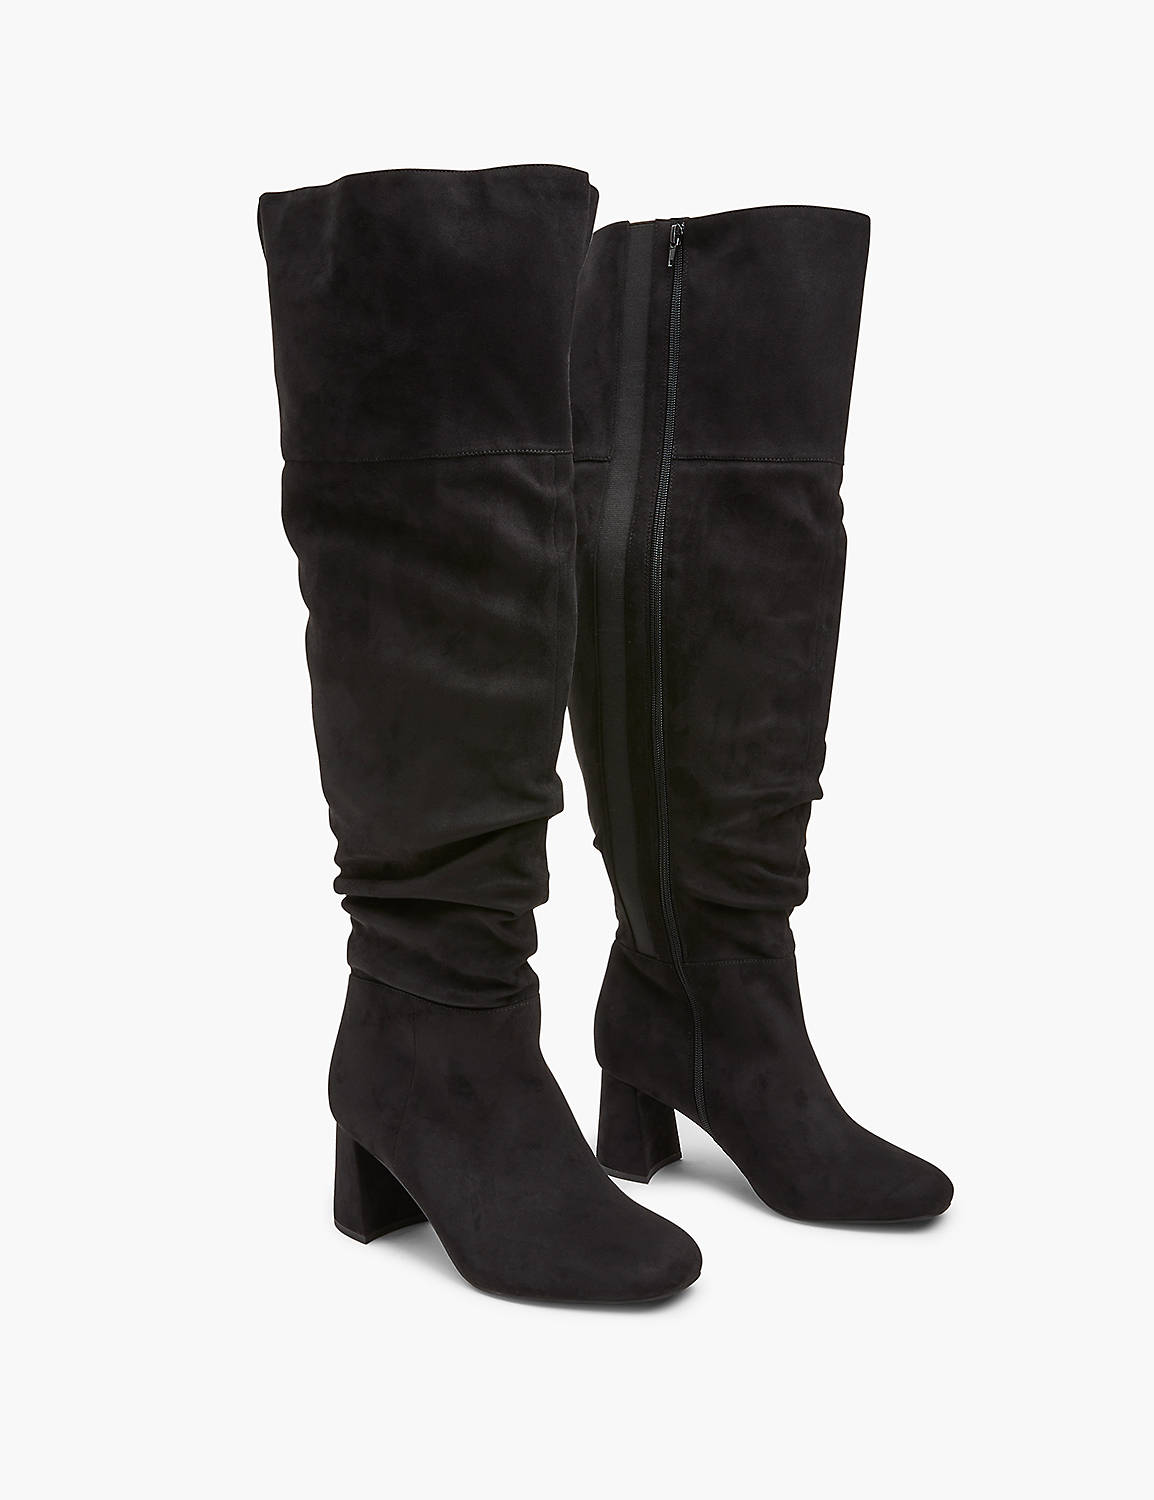 lane bryant dream cloud faux-suede over-the-knee boot 8w black